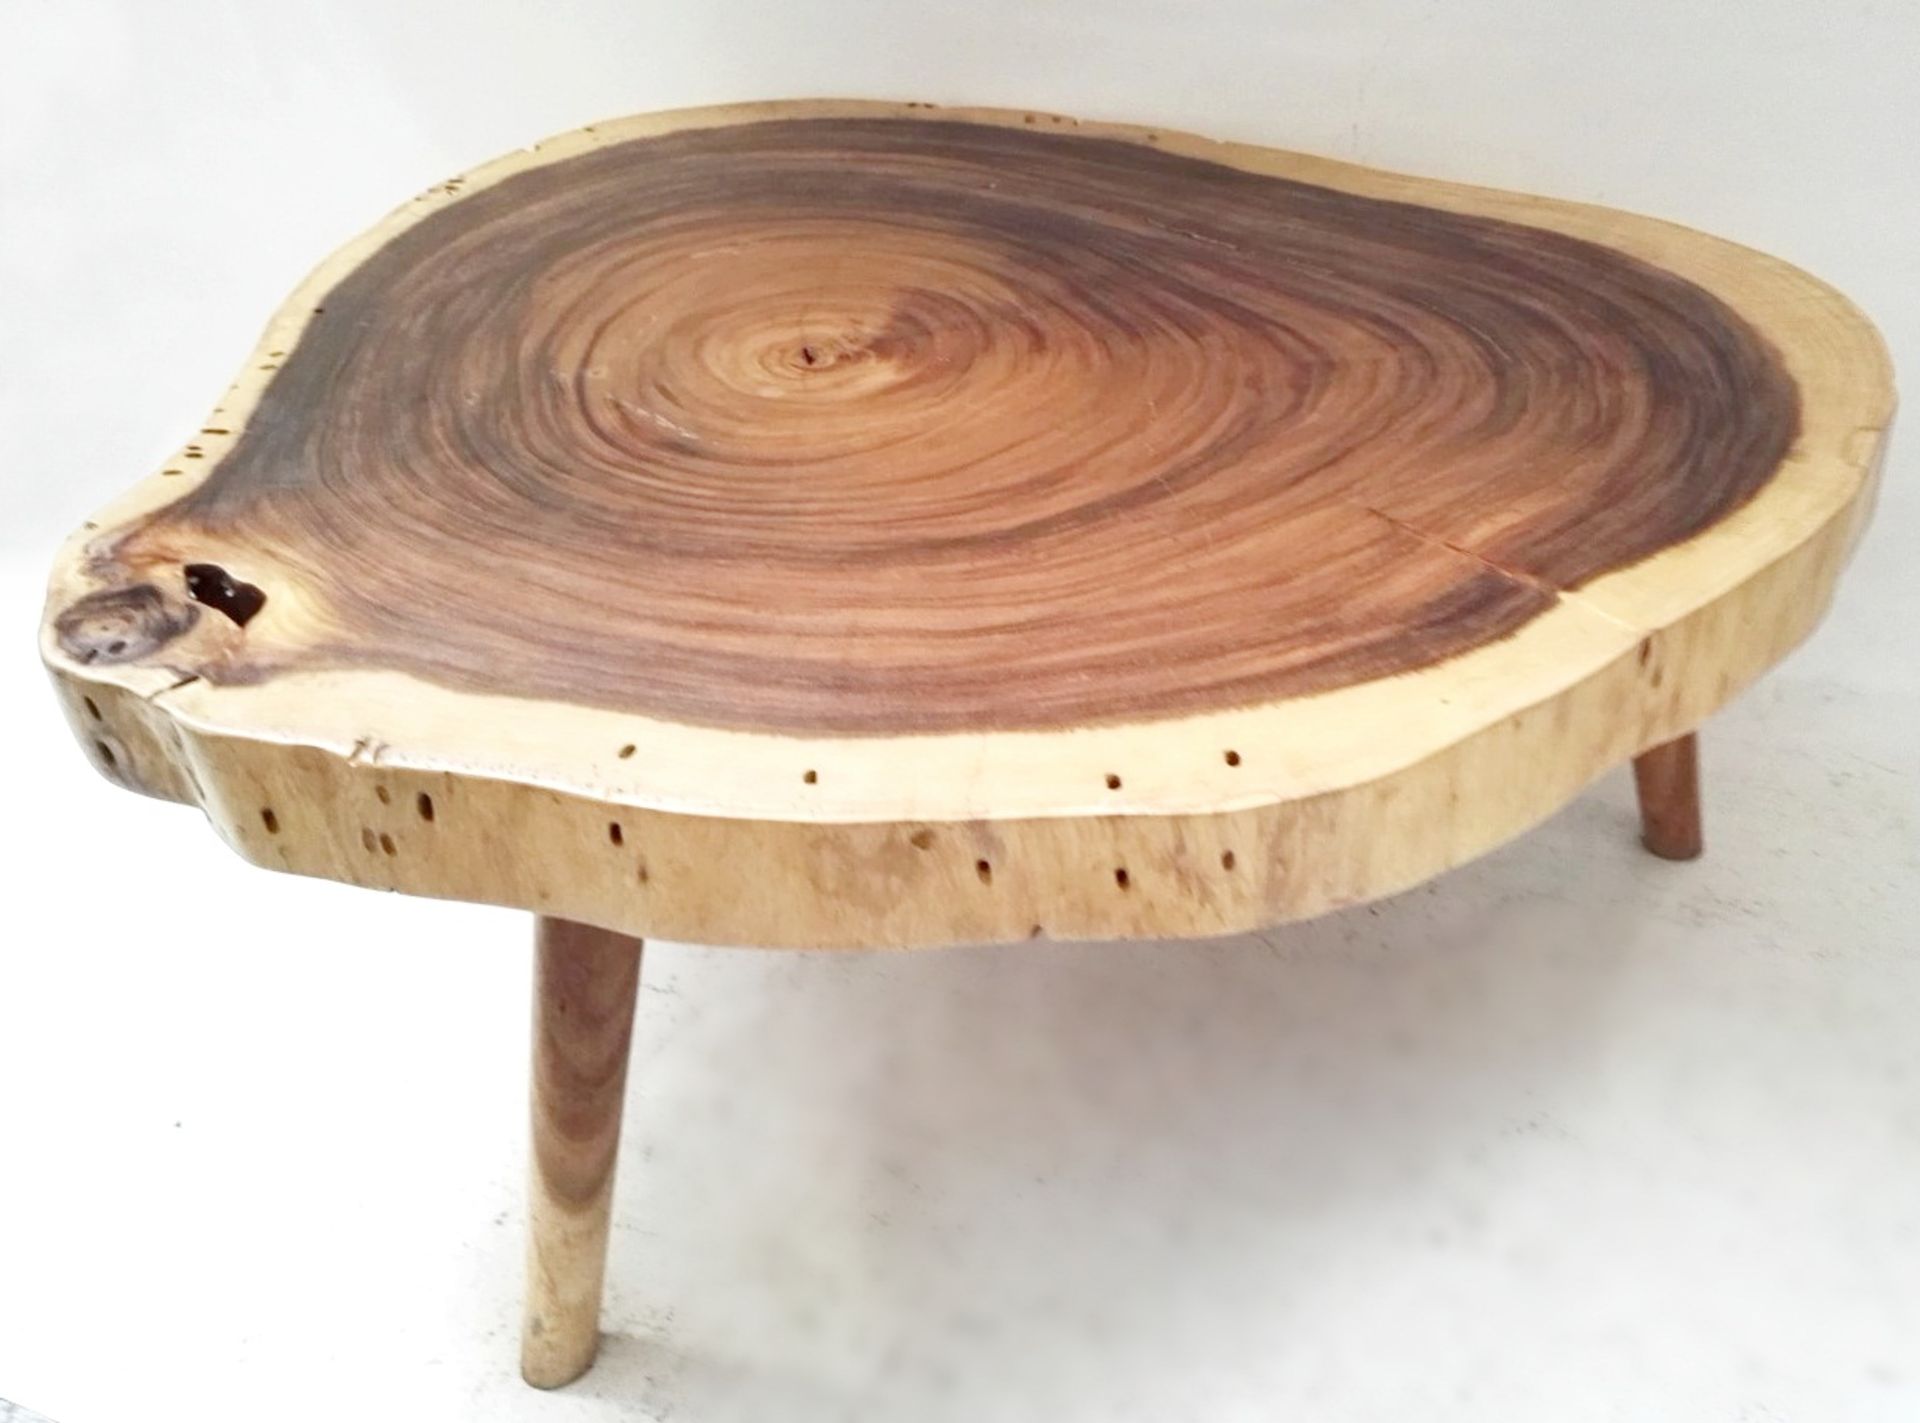 1 x Unique Reclaimed Solid Tree Trunk Coffee Table - Diameter 113 Height: 45cm - Ref: HK345